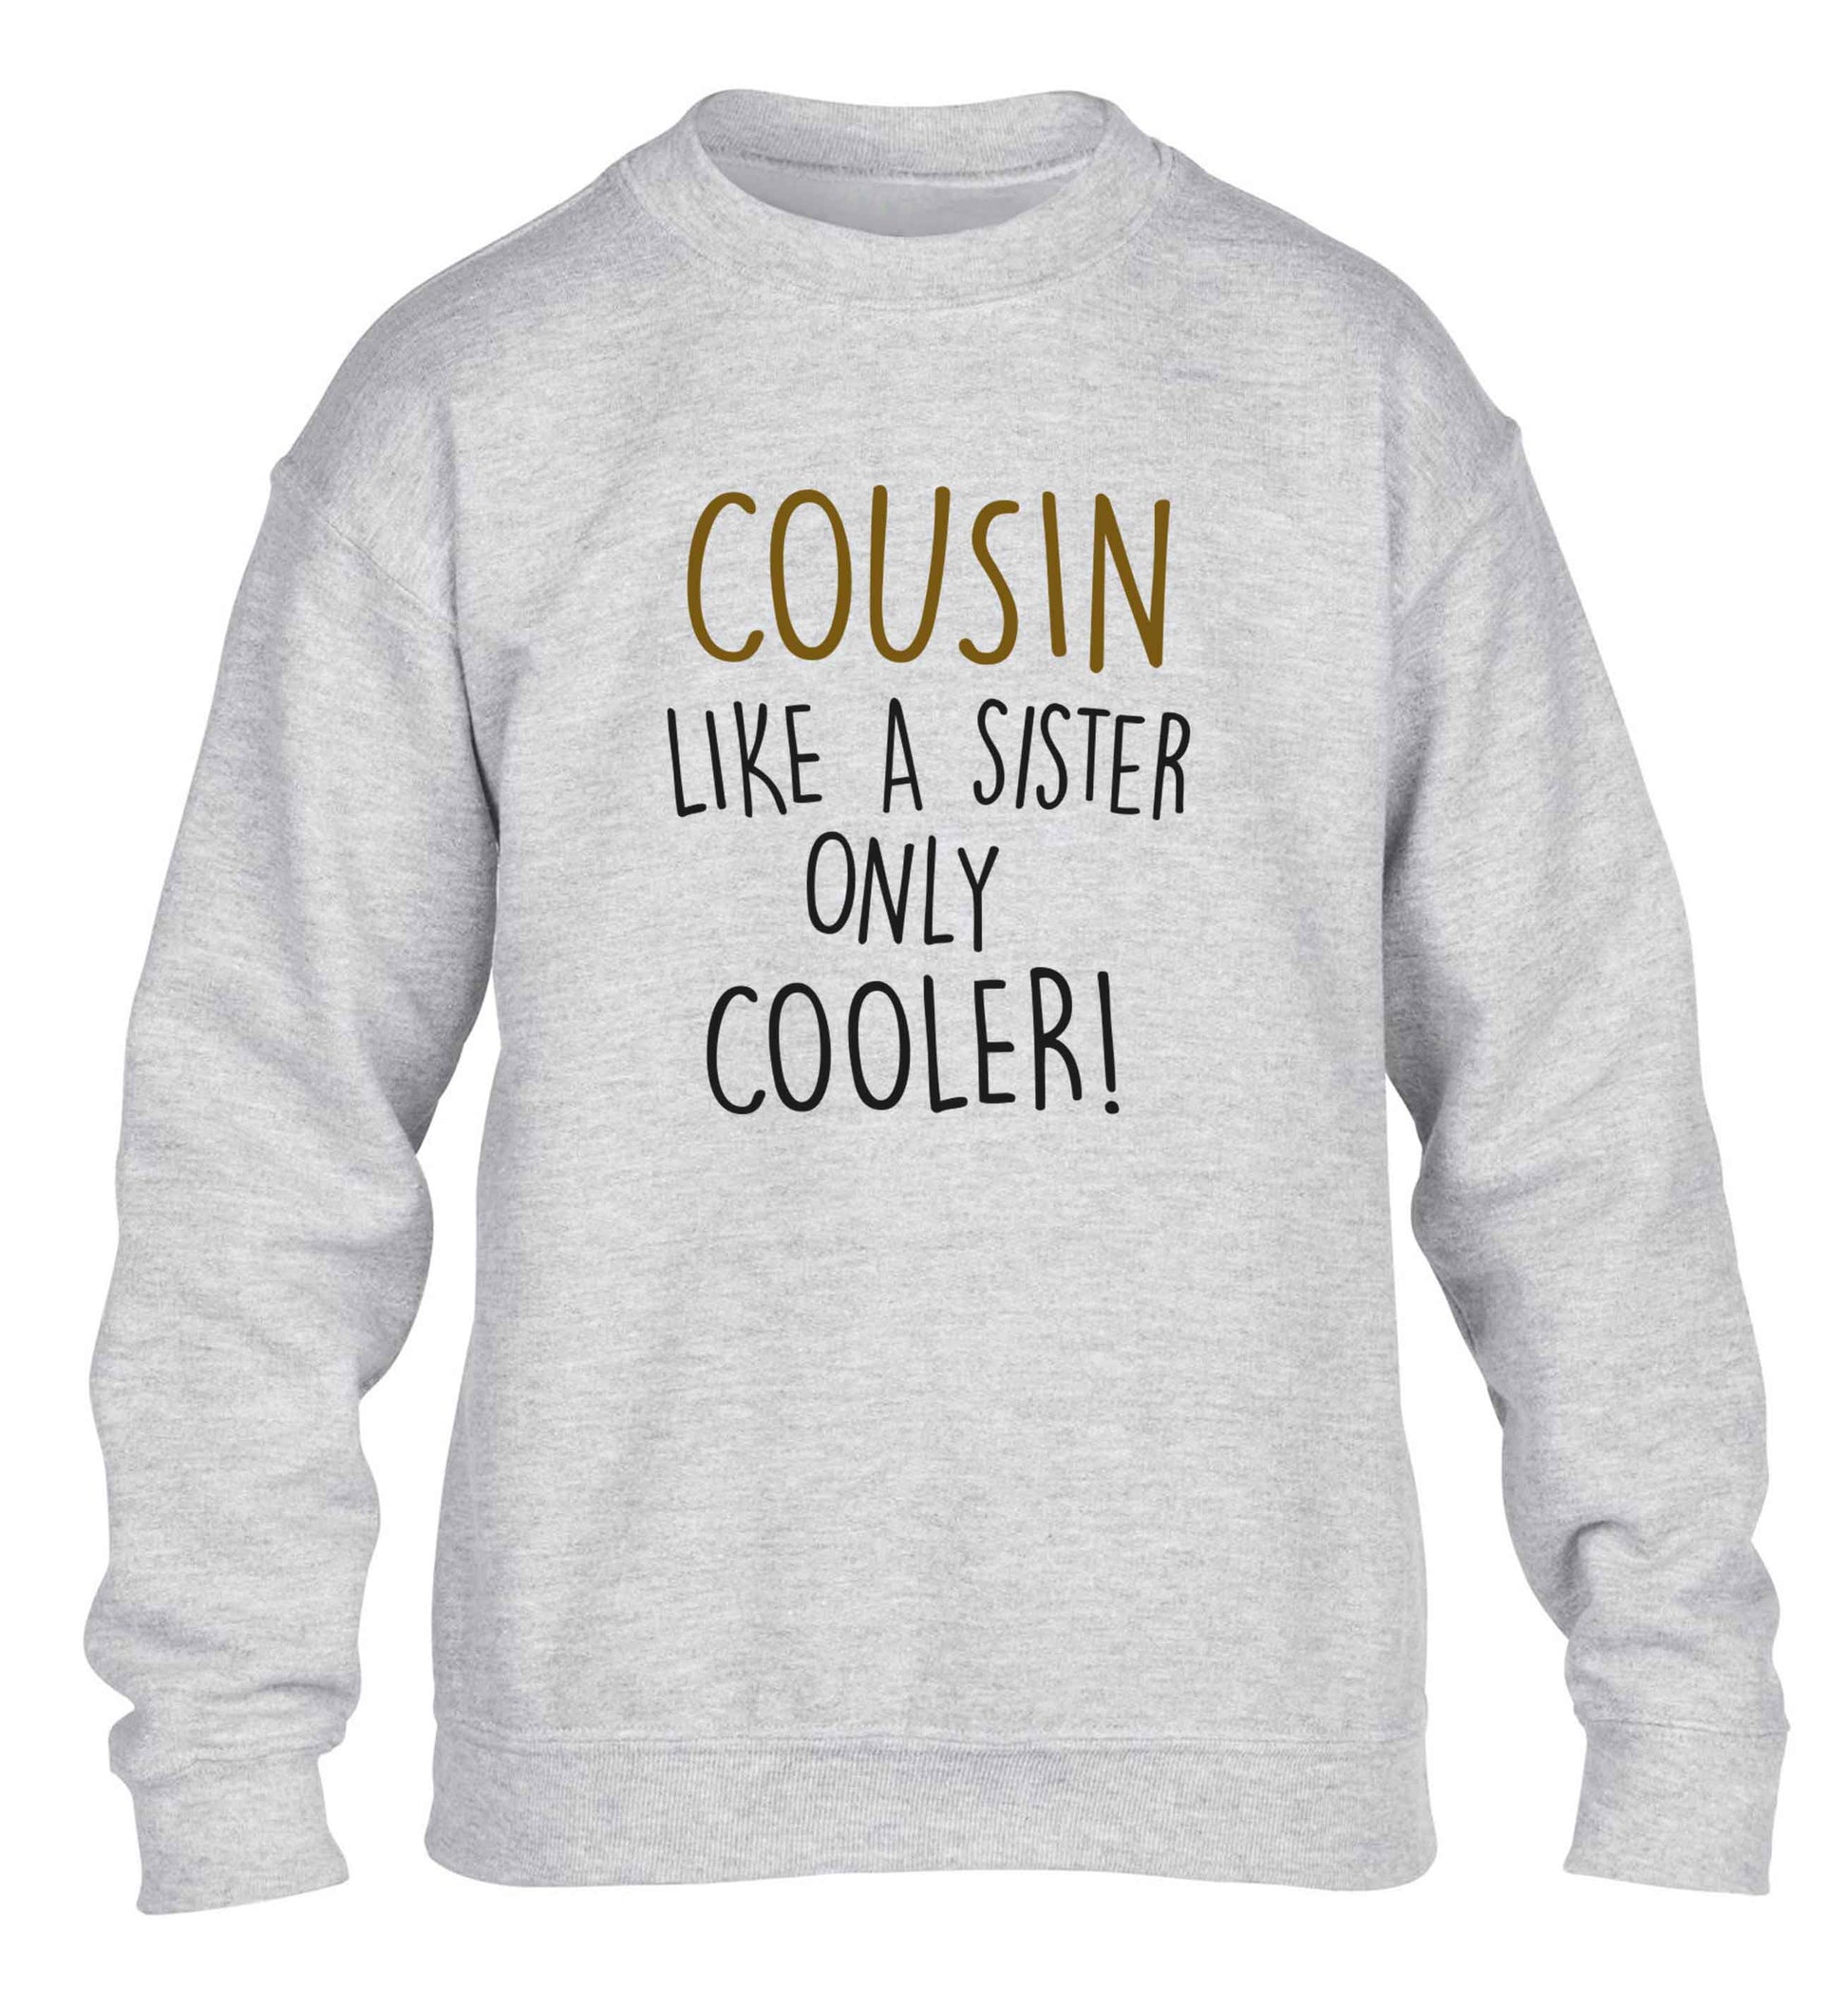 Cousin like a sister only cooler children's grey sweater 12-13 Years